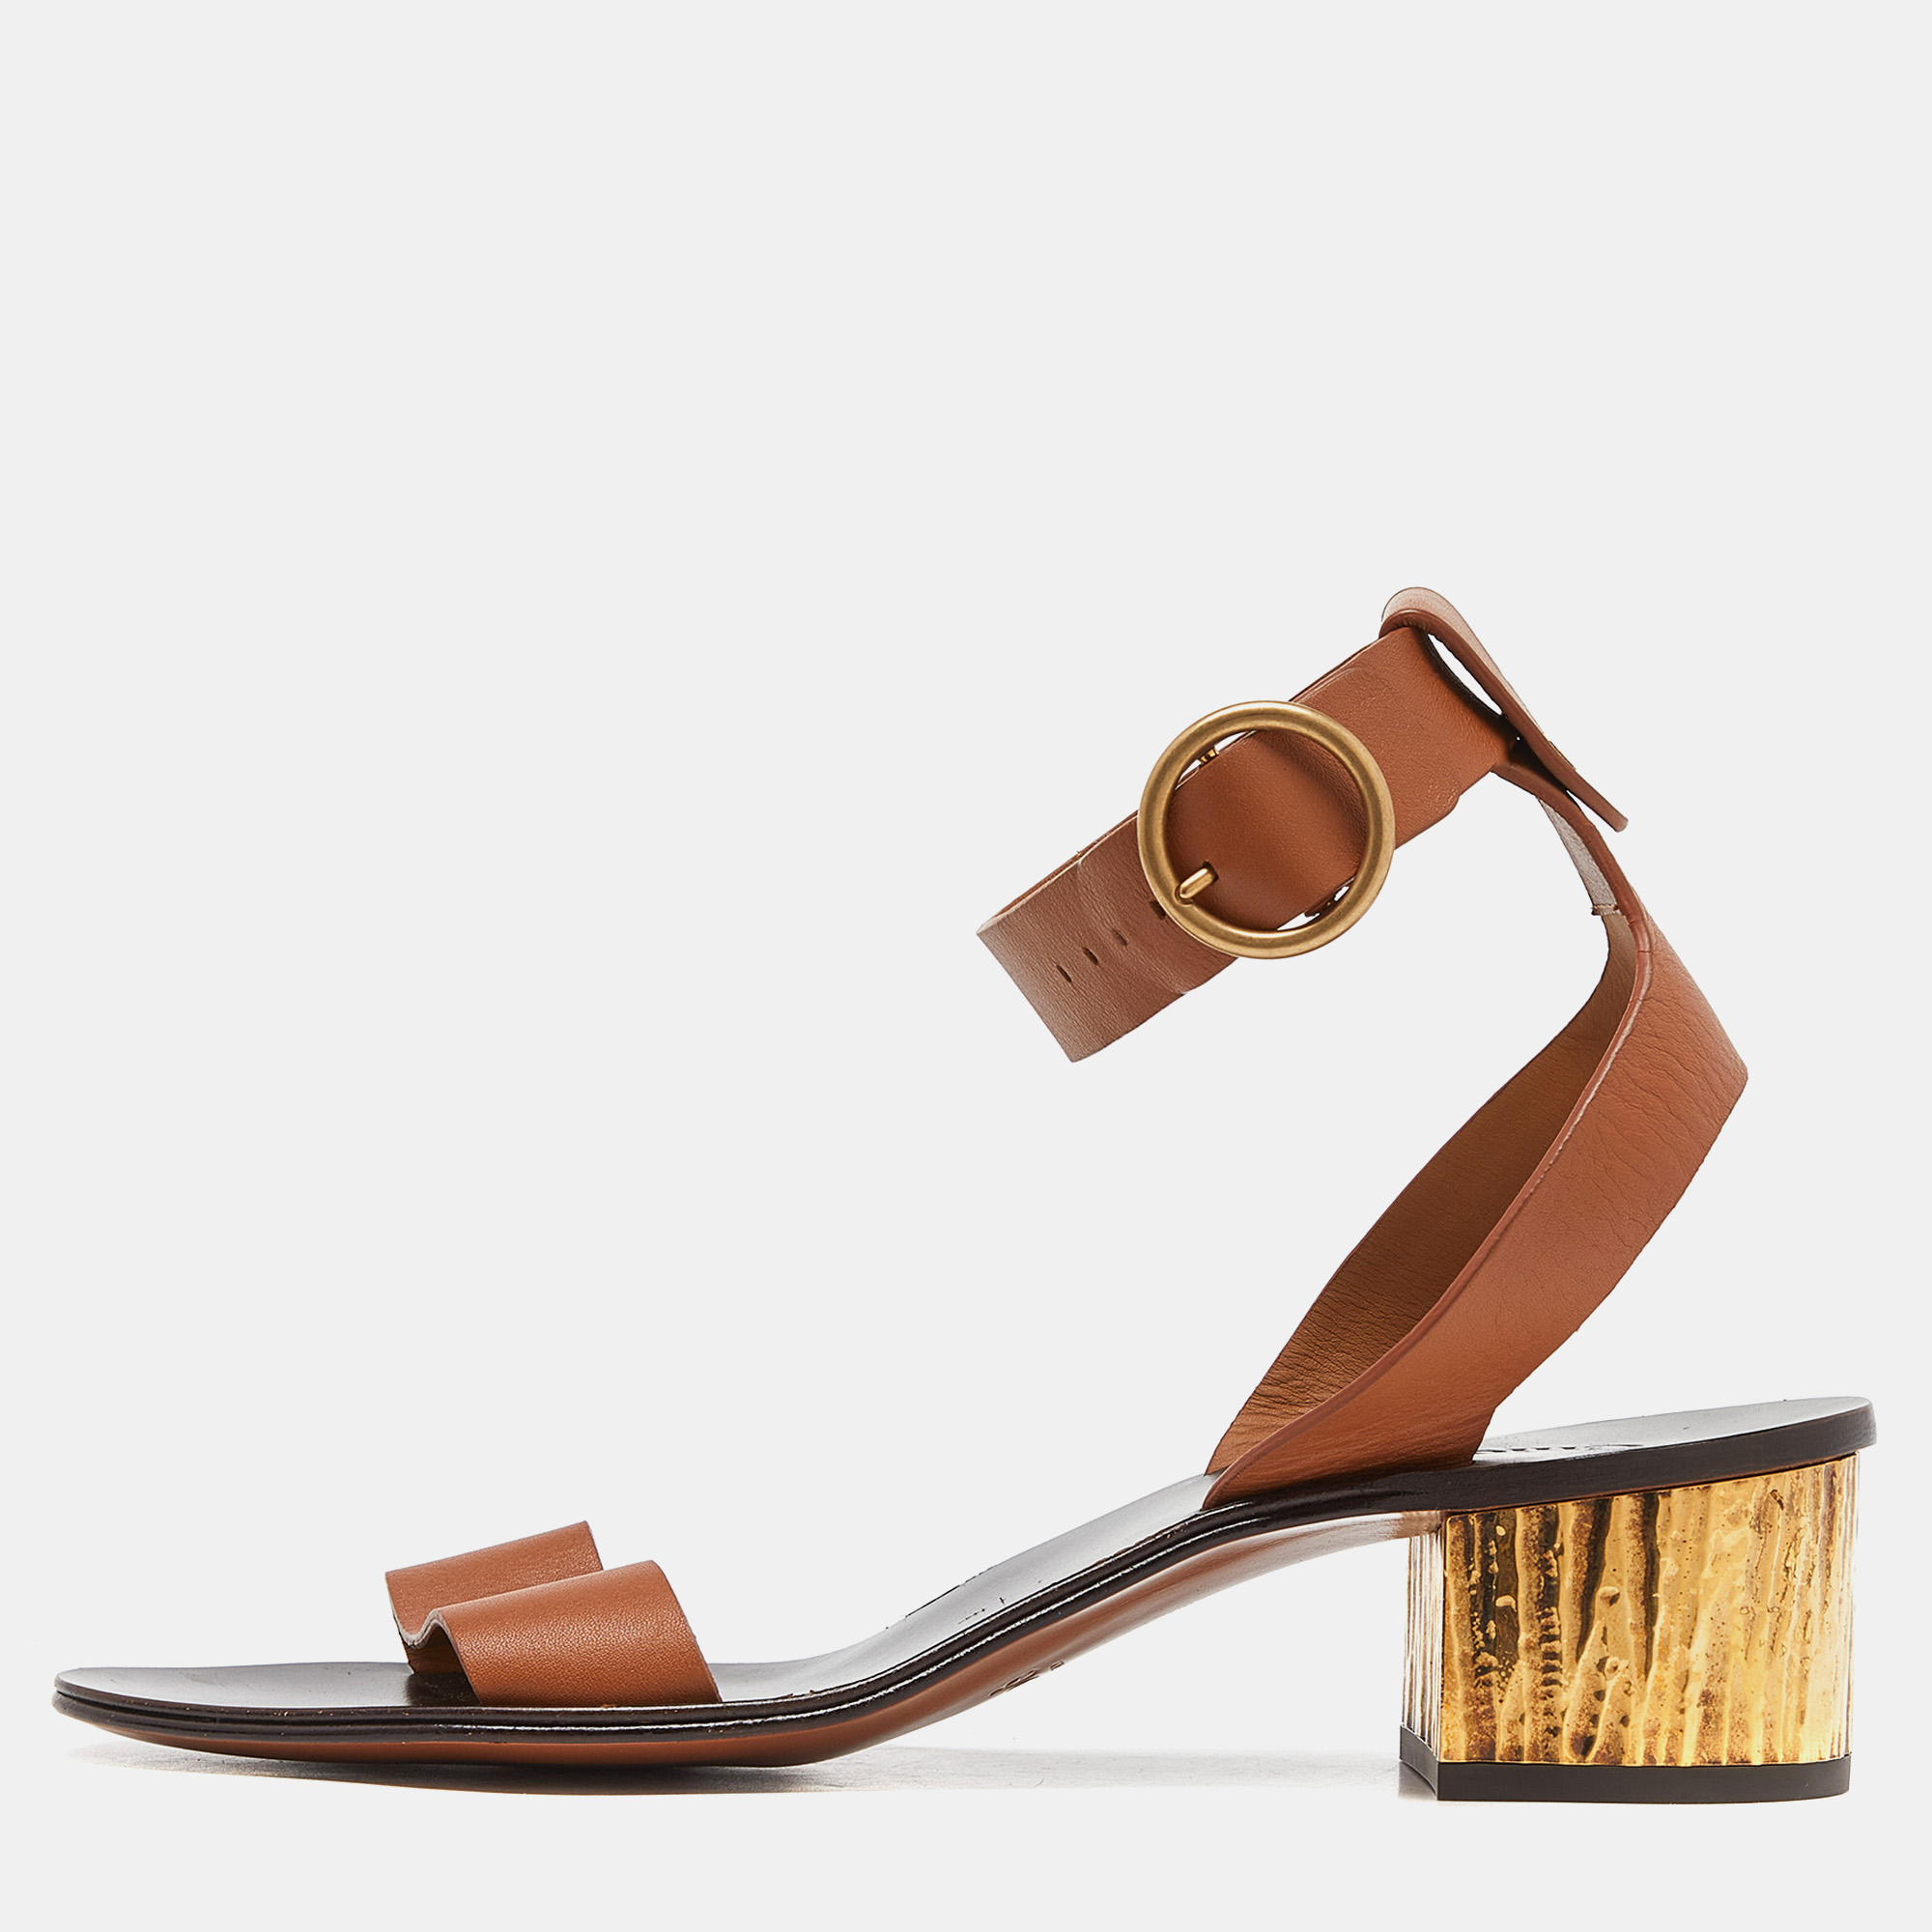 Chloe brown leather block heel ankle strap sandals size 39